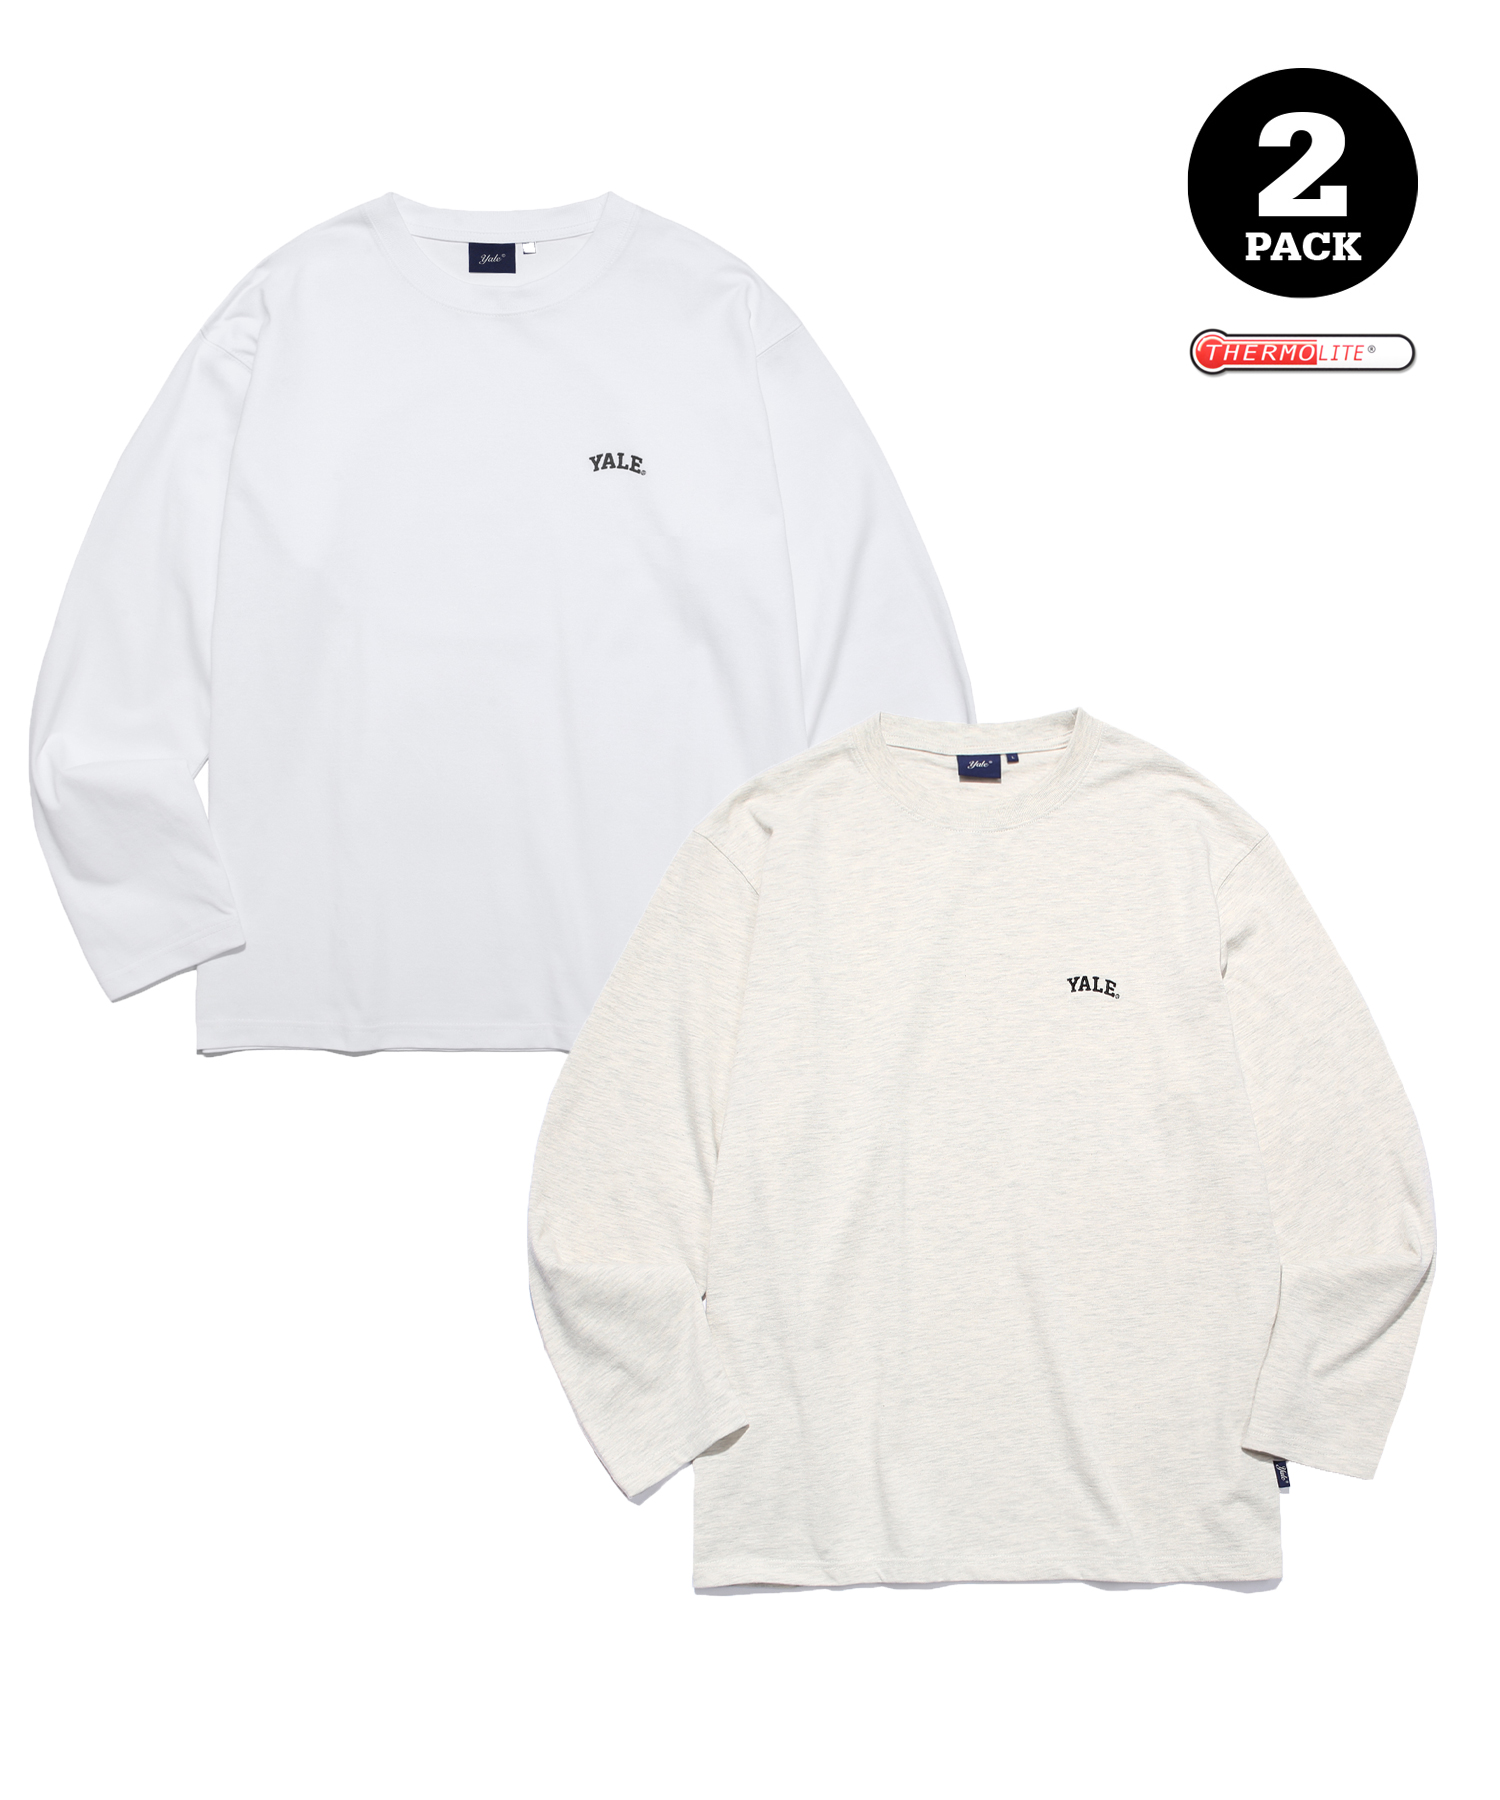 [ONEMILE WEAR] WARM UP 2PACK SMALL ARCH LS WHITE/OATMEAL